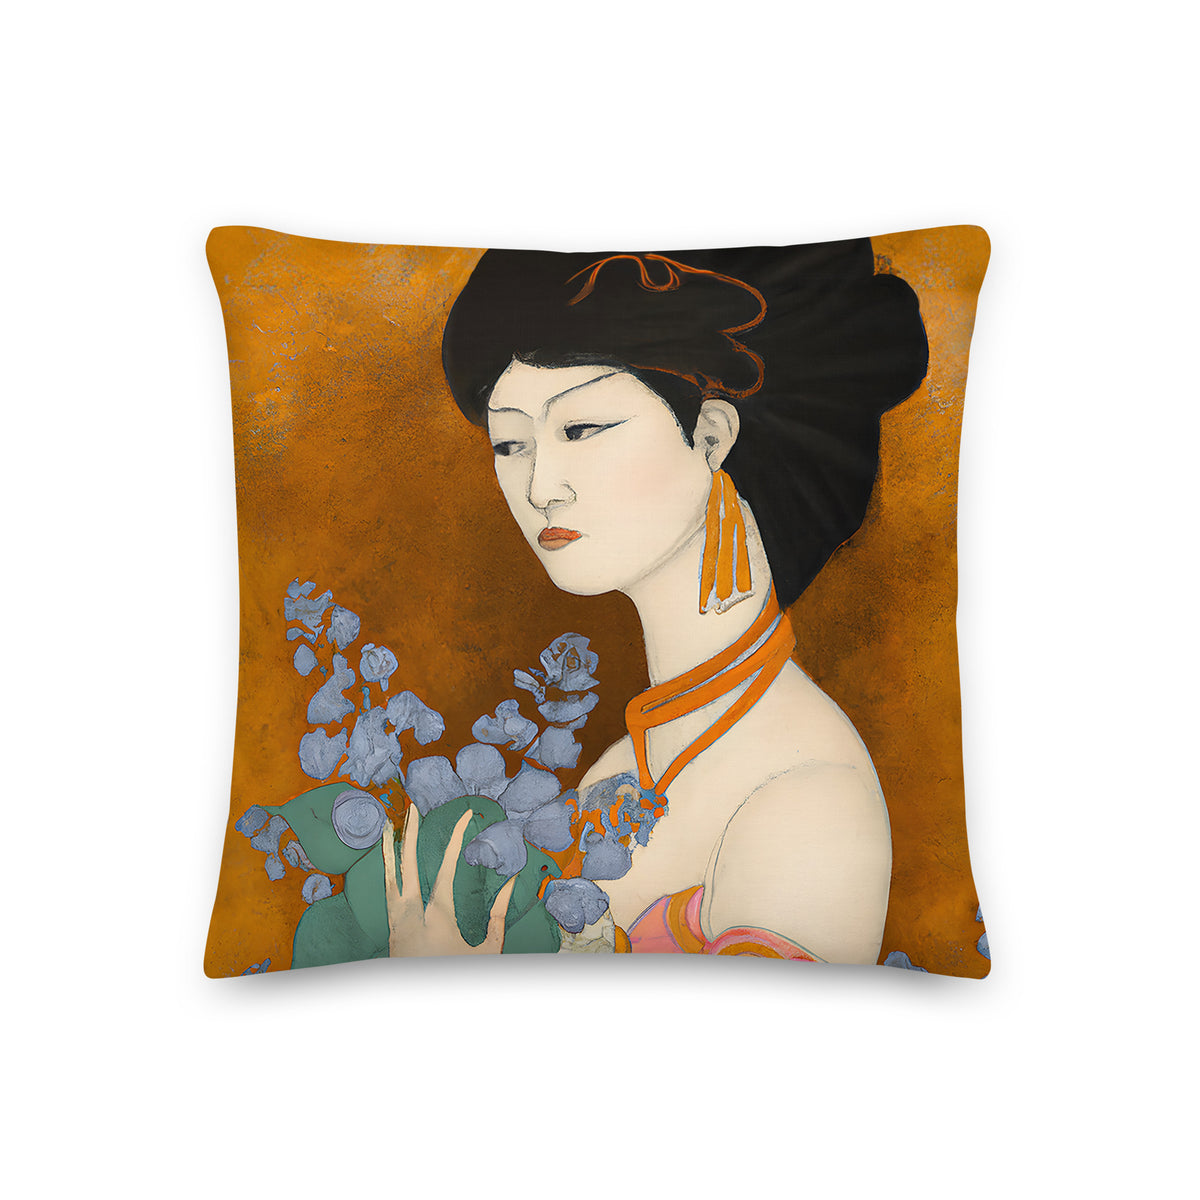 Premium Pillow with a painted image of a Geisha holding some violets